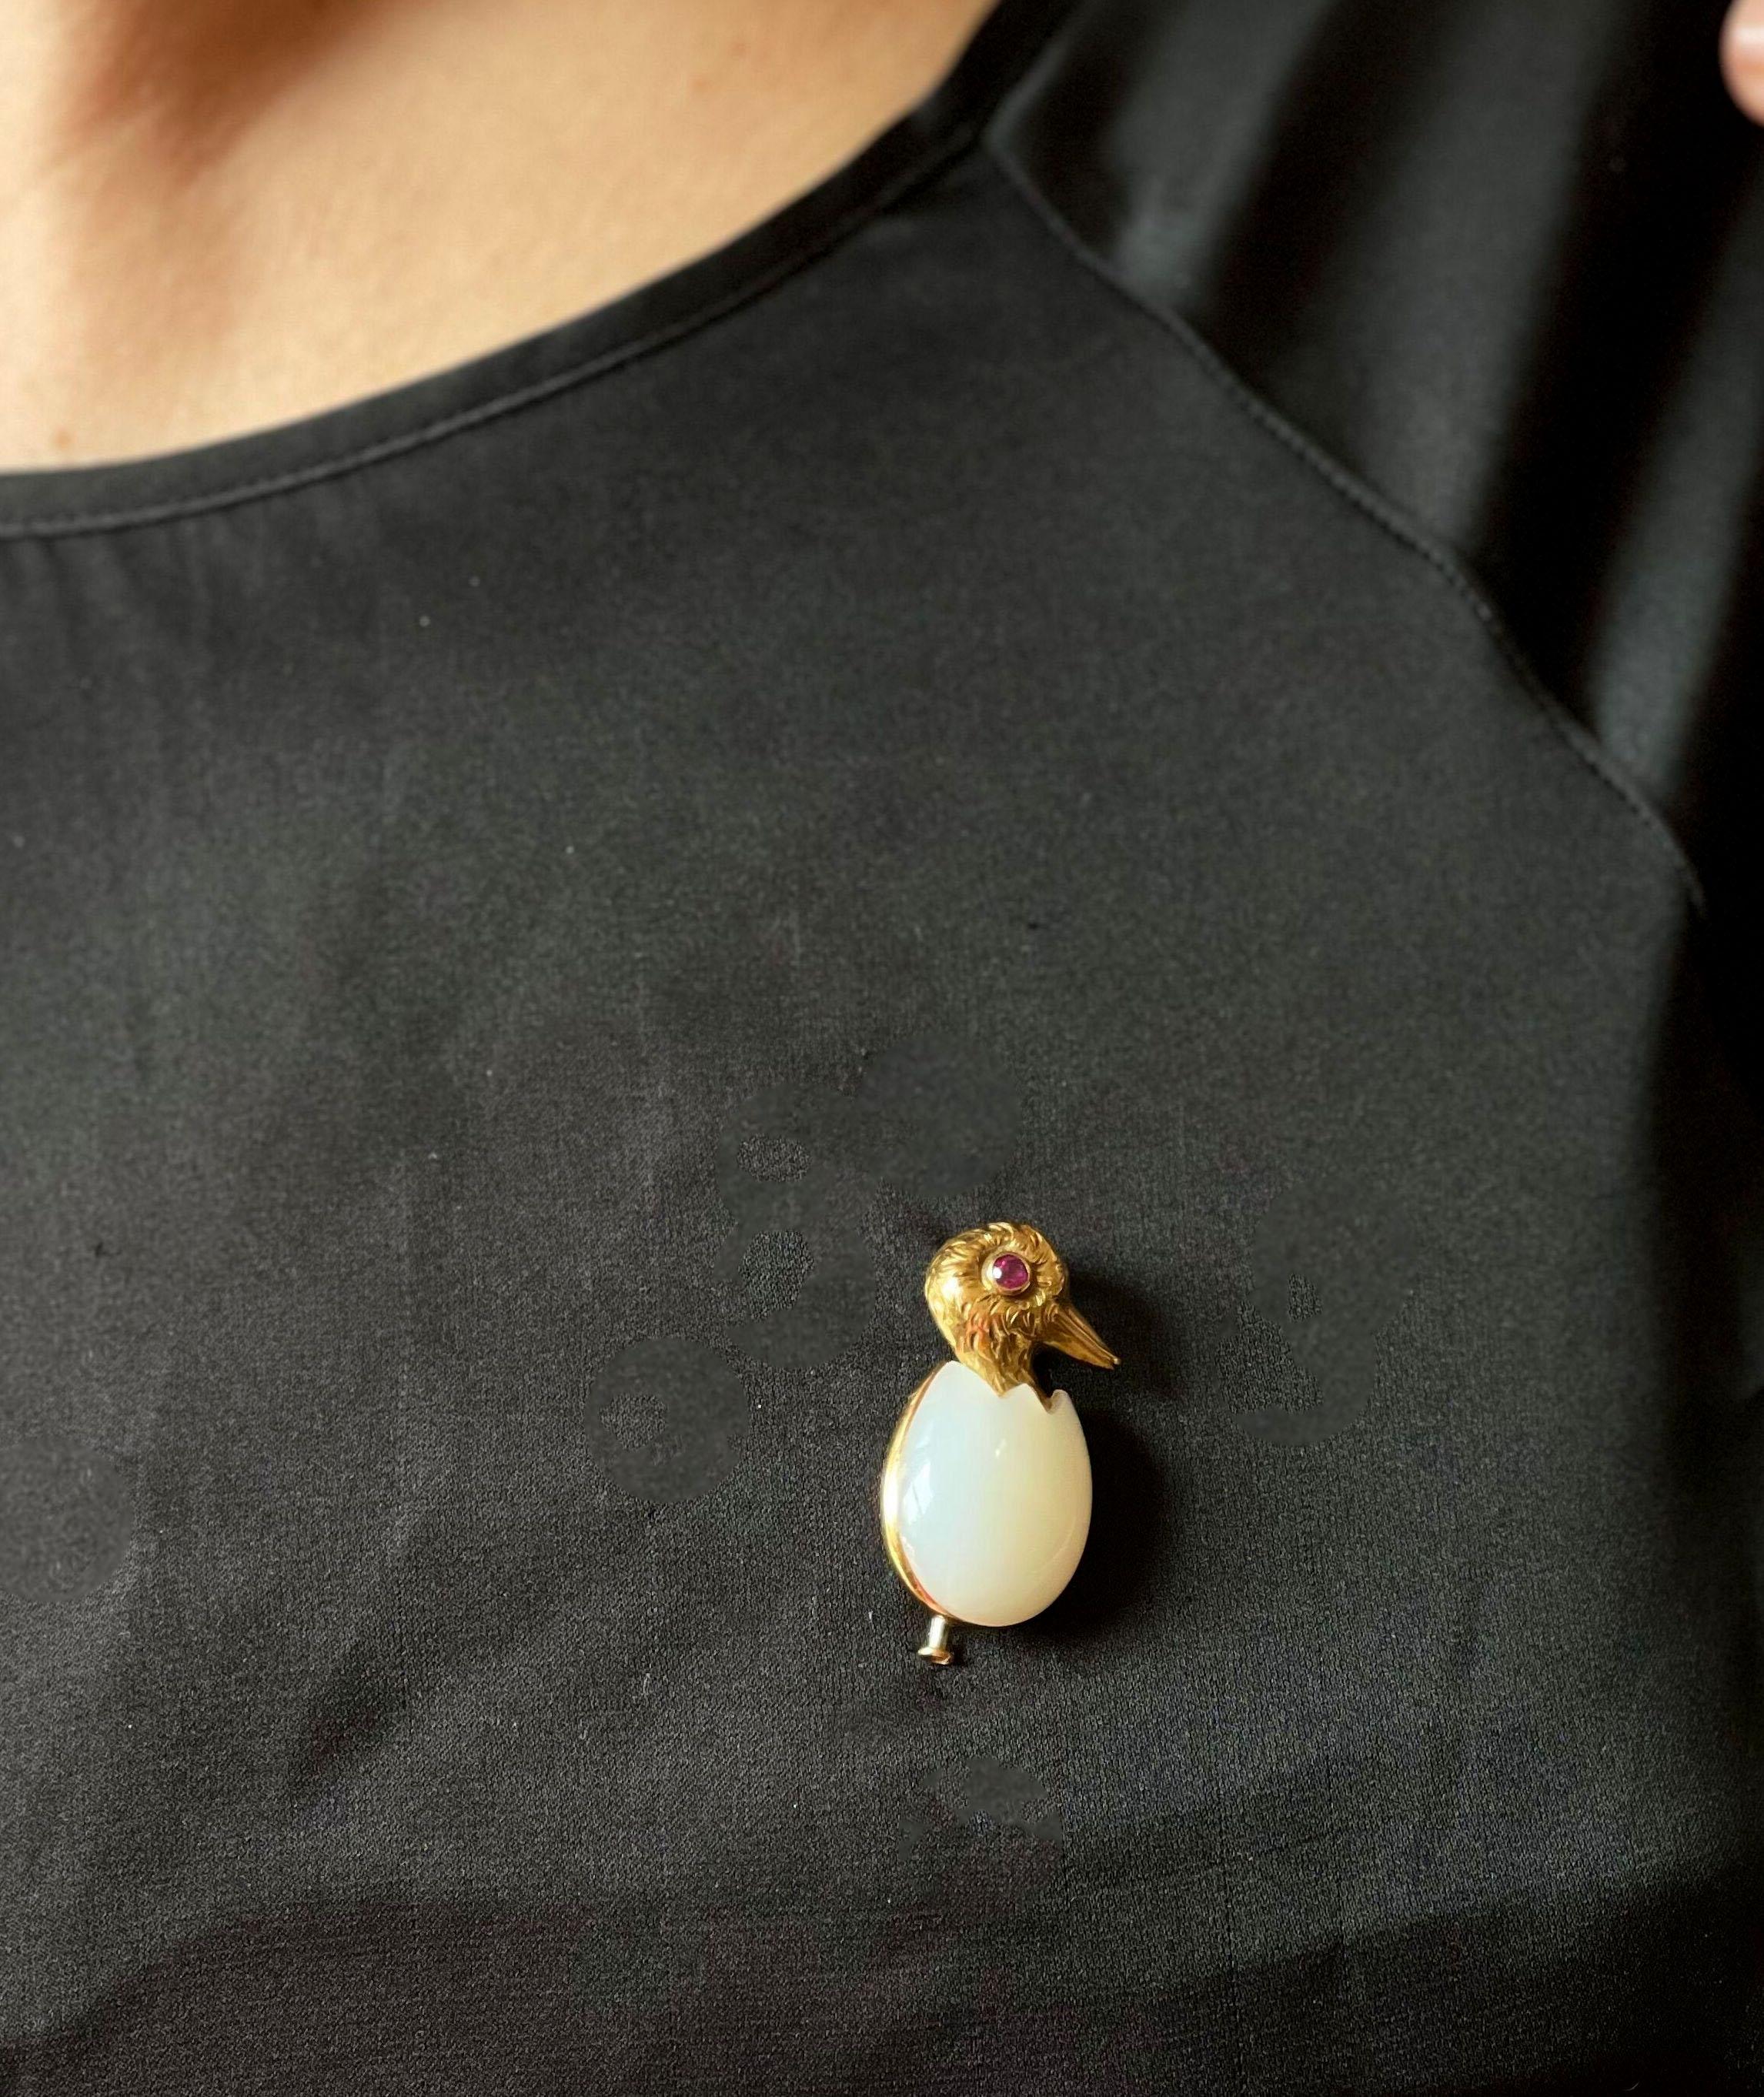 Adorable and unique Cartier brooch, set in 18k gold, featuring a duckling in an egg shell, with chalcedony and ruby eye. Brooch measures 1.25